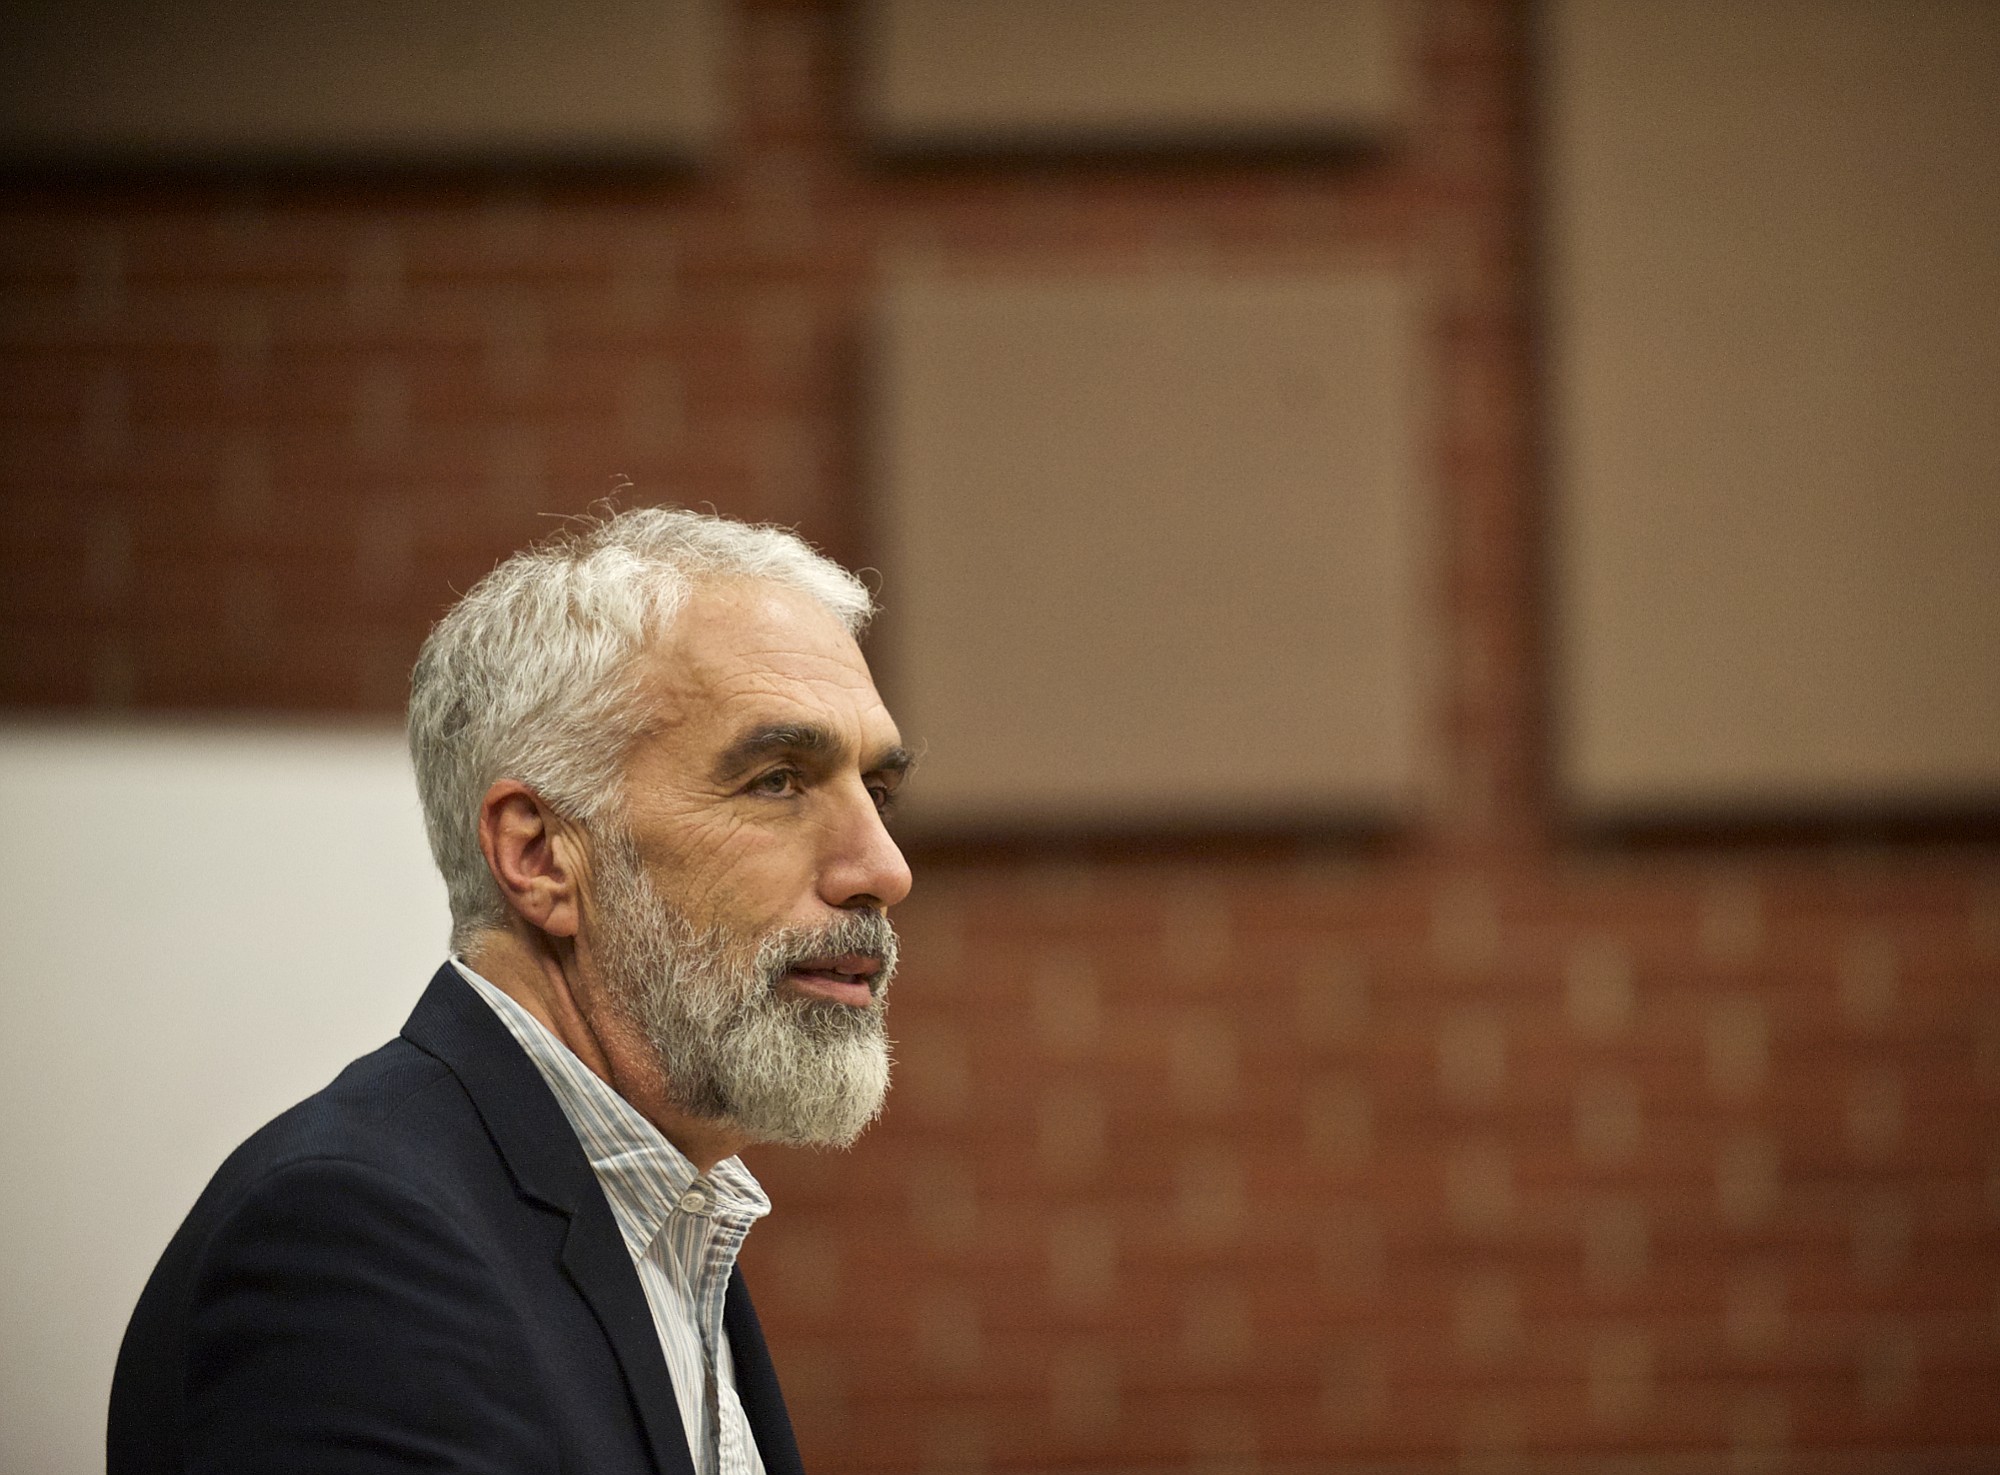 Bestselling author David Sheff, who documented his son's struggle with drugs in &quot;Beautiful Boy&quot; and who wrote about the whole nation's struggle in &quot;Clean,&quot; speaks at Clark College on Wednesday, Sept.